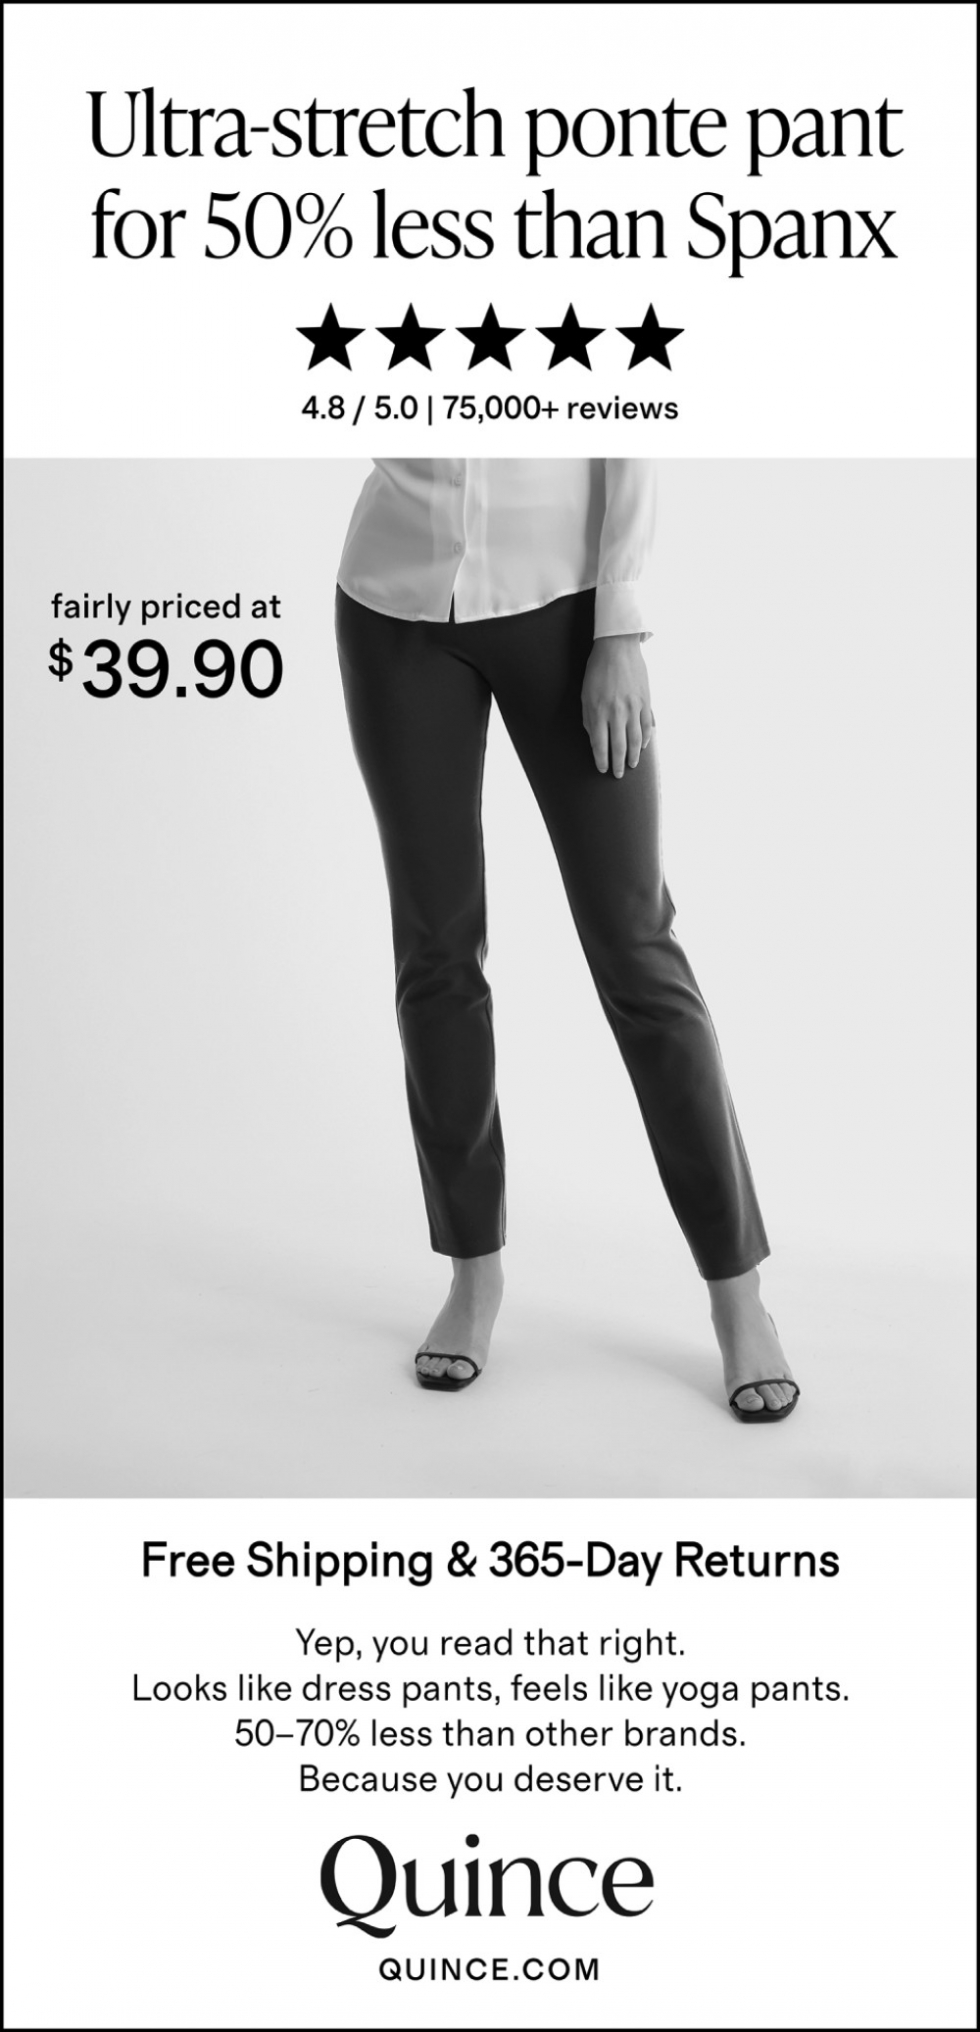 Ultra-Stretch Ponte Pant for 50% Less Than Spanx, Quince